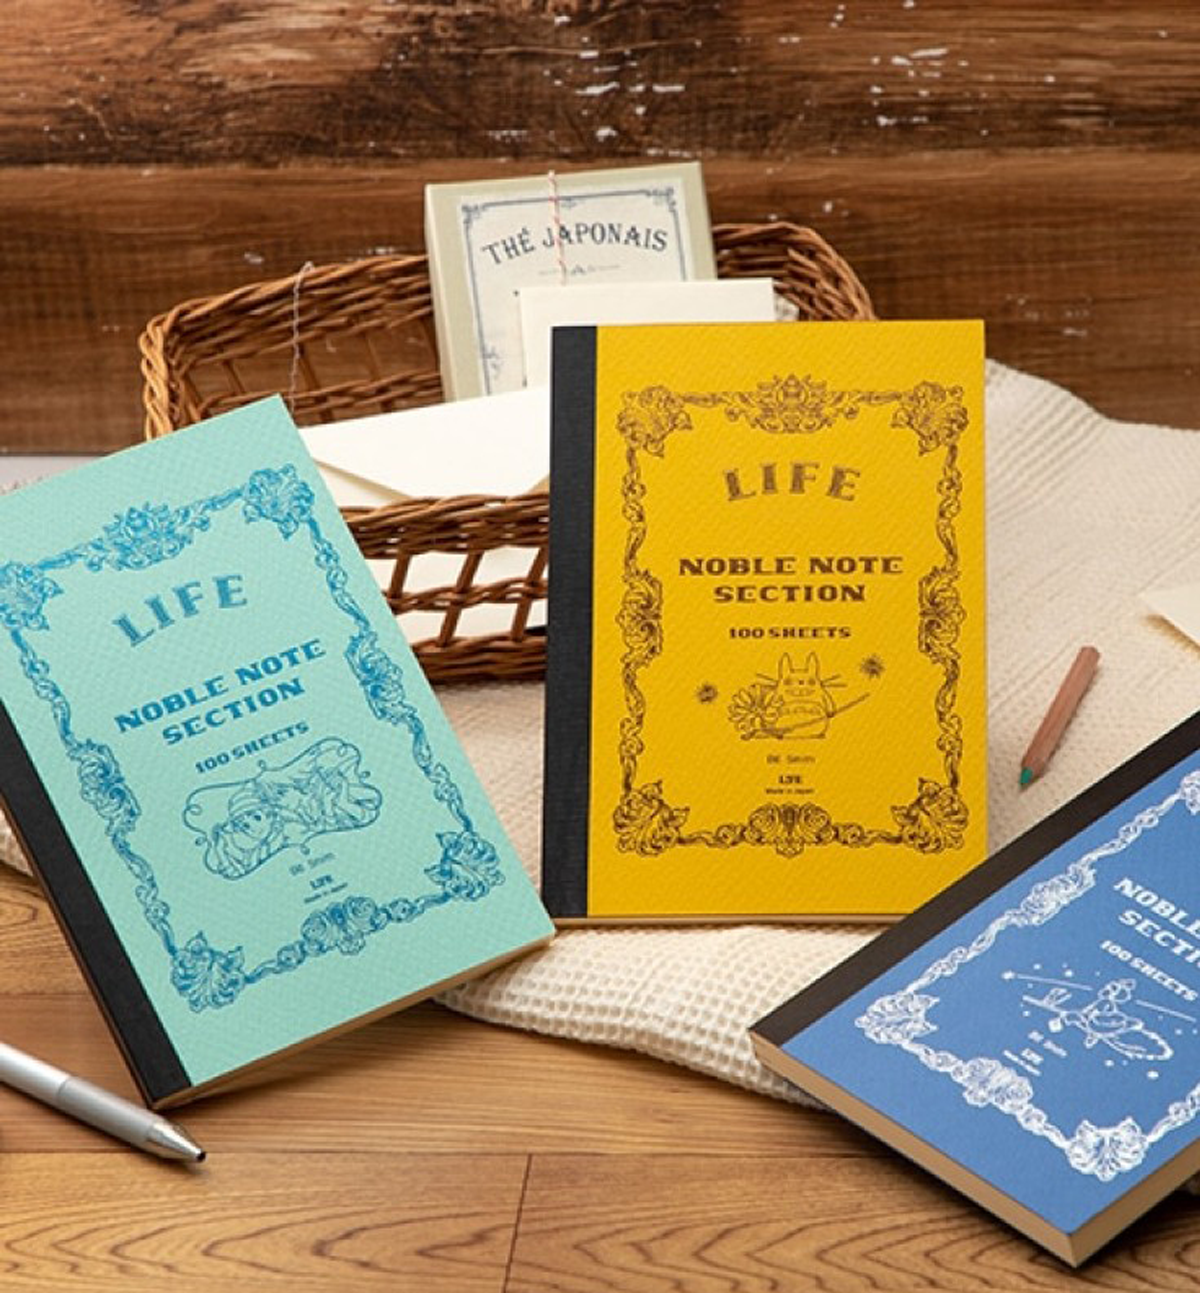 Howl's Moving Castle Notebook [Life]